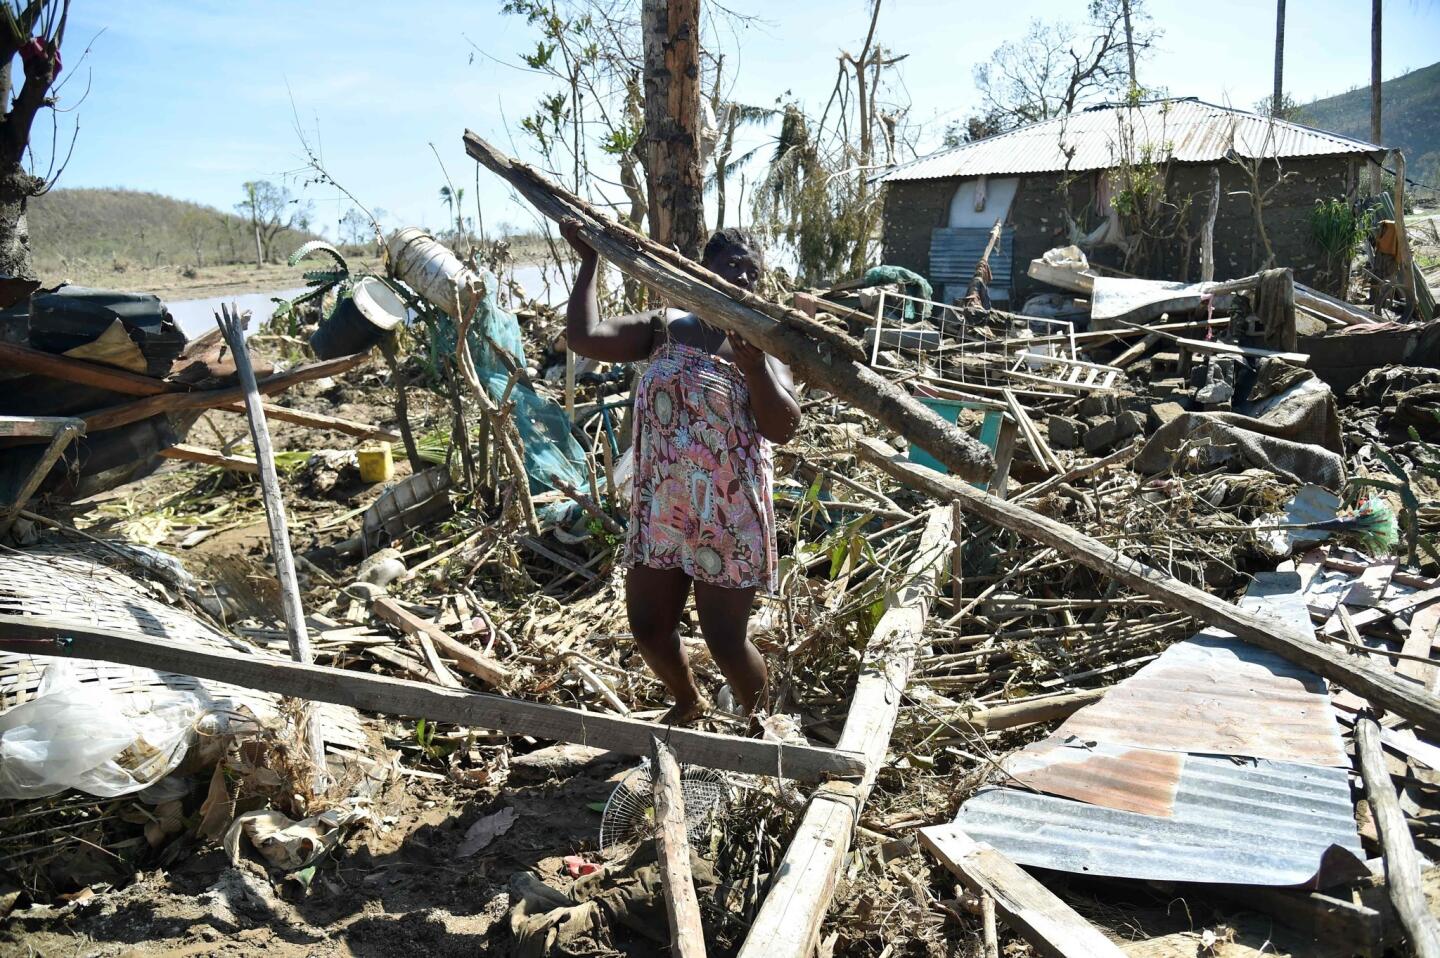 Sasa, 25, takes the remains of her house destroyed by Hurricane Matthew to build another in a nearby field in Jeremie, Haiti on Oct. 8, 2016.